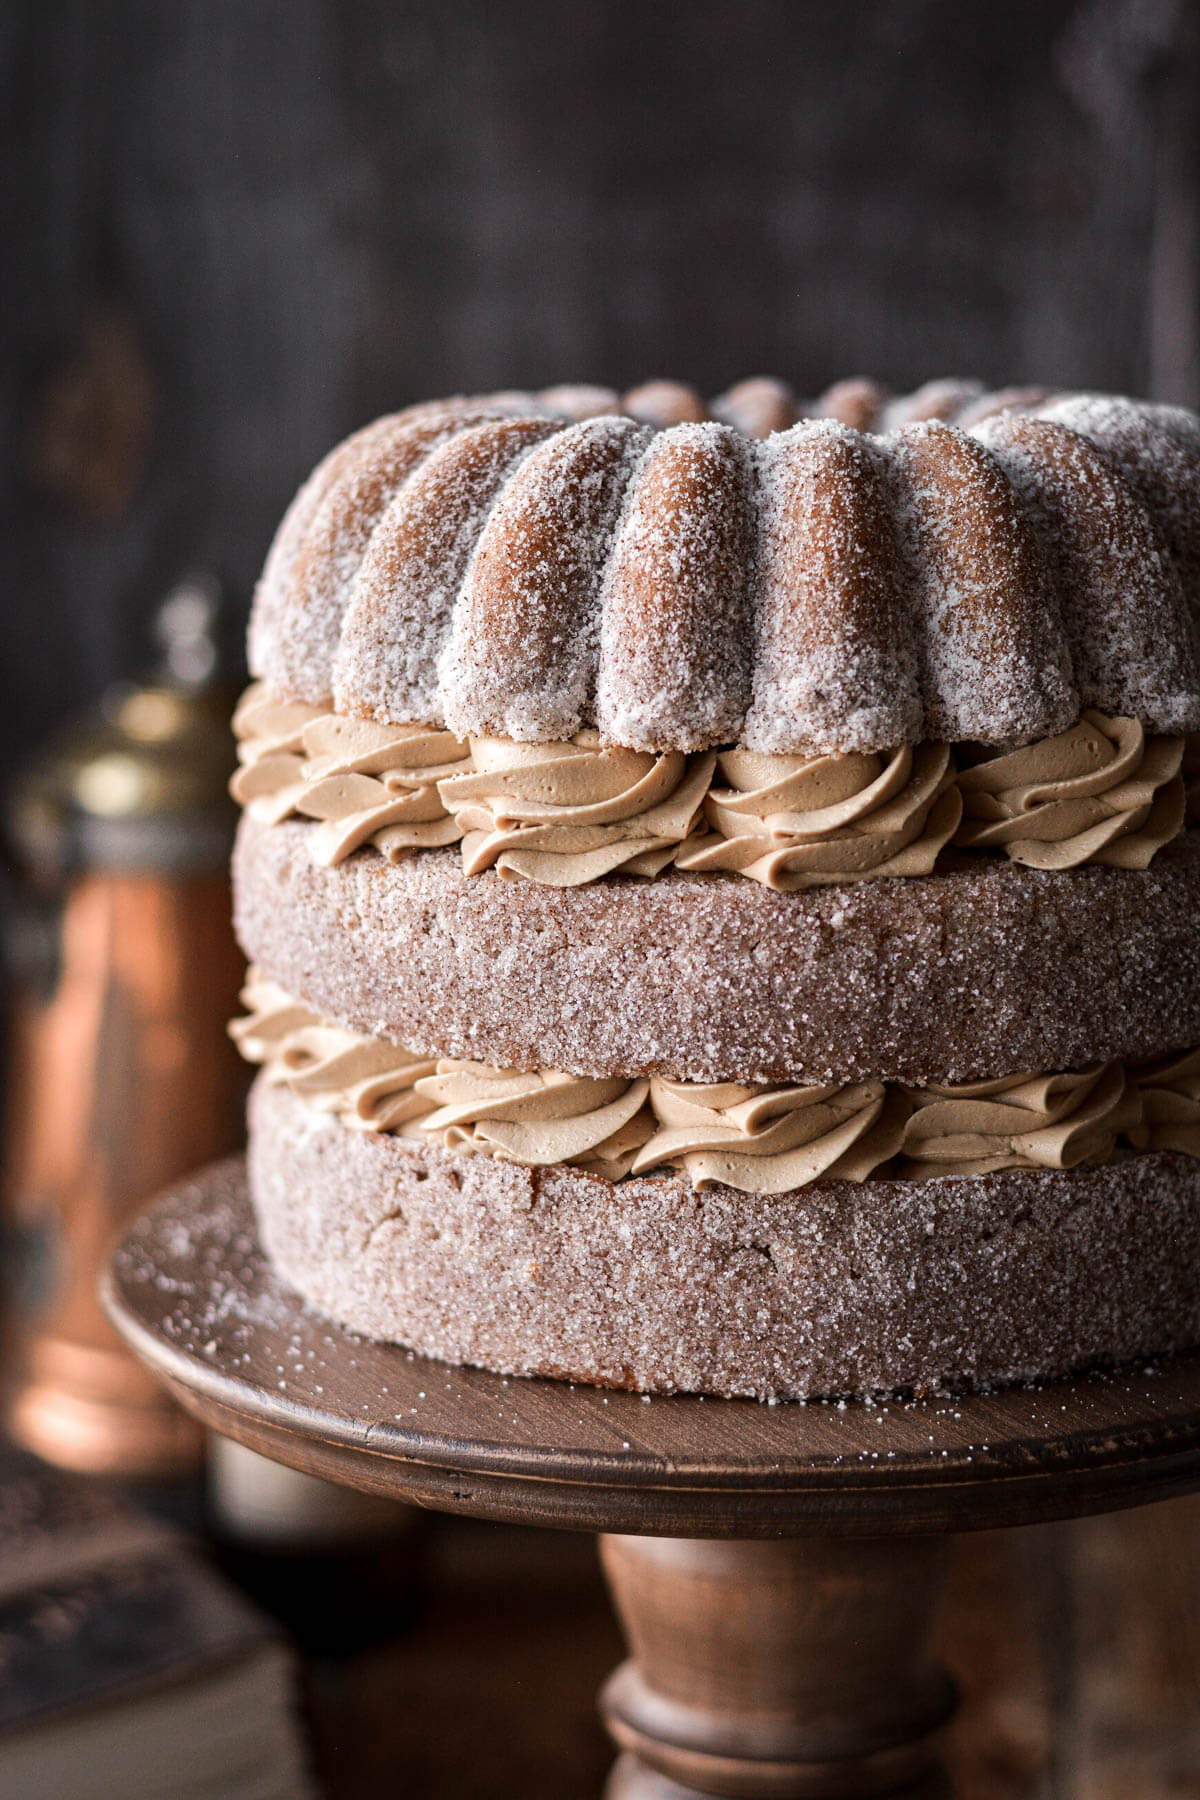 Coffee layer cake coated in espresso sugar and filled with swirls of coffee buttercream on a wooden cake stand.